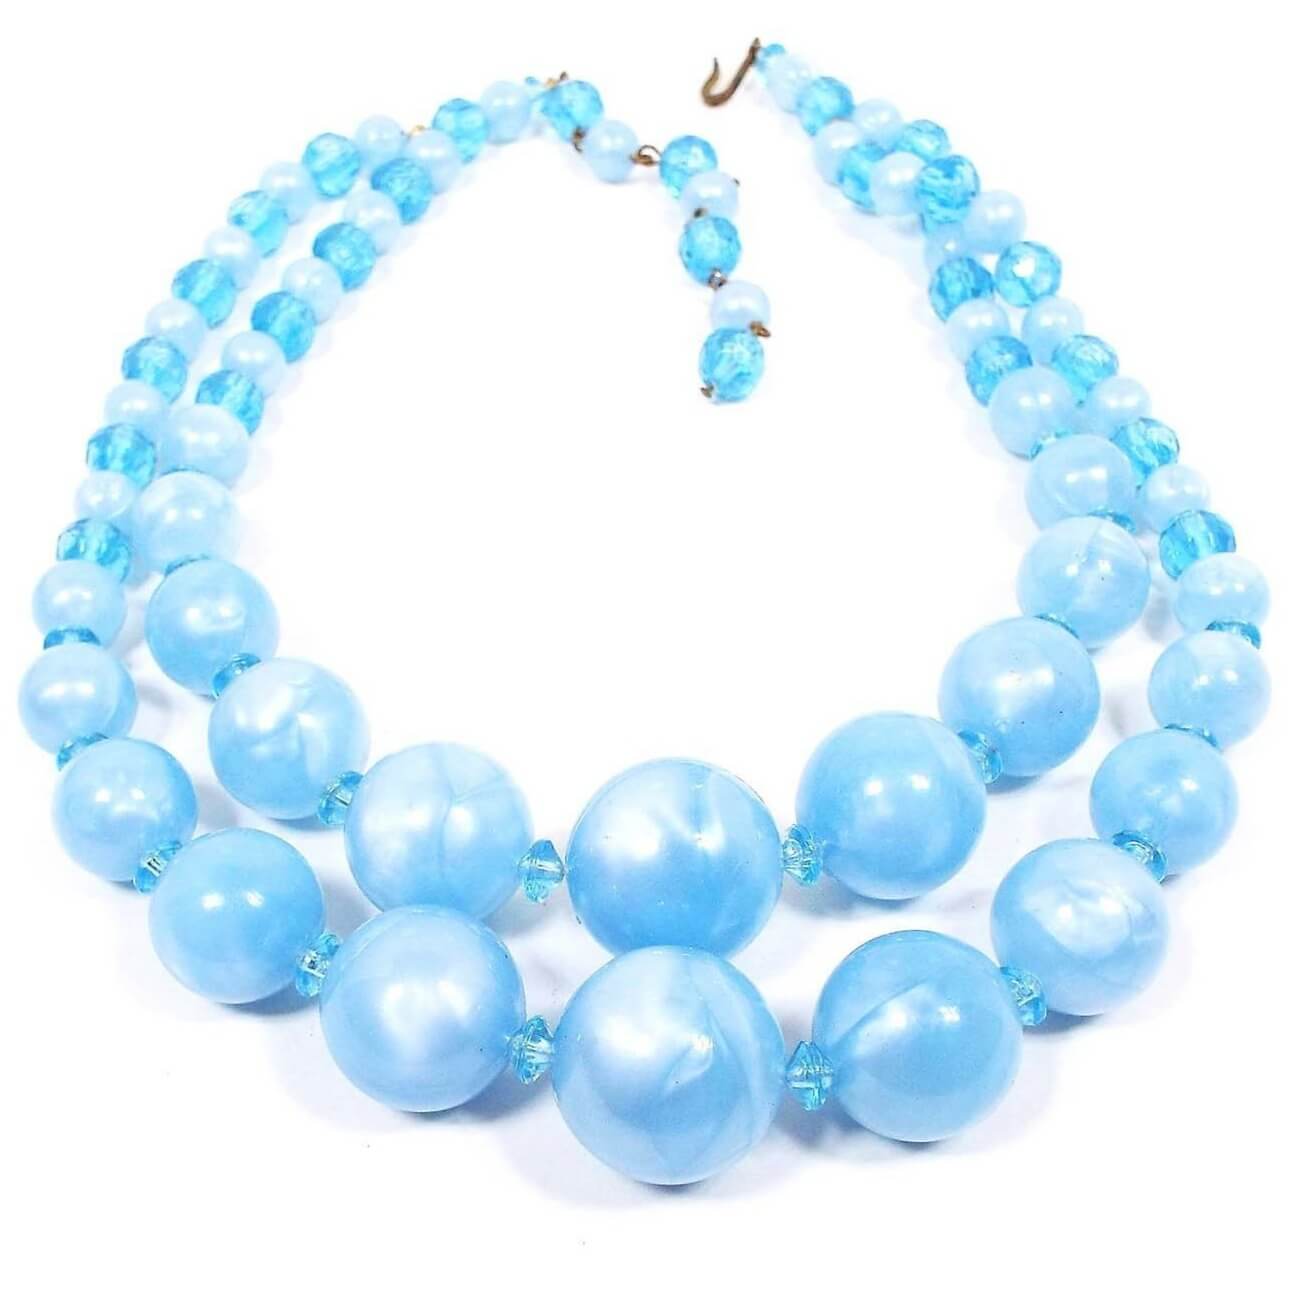 Front view of the Mid Century vintage beaded multi strand necklace. There are round pearly blue lucite beads with translucent blue acrylic disc beads in between them. There are two rows of beads and a hook clasp at the end.